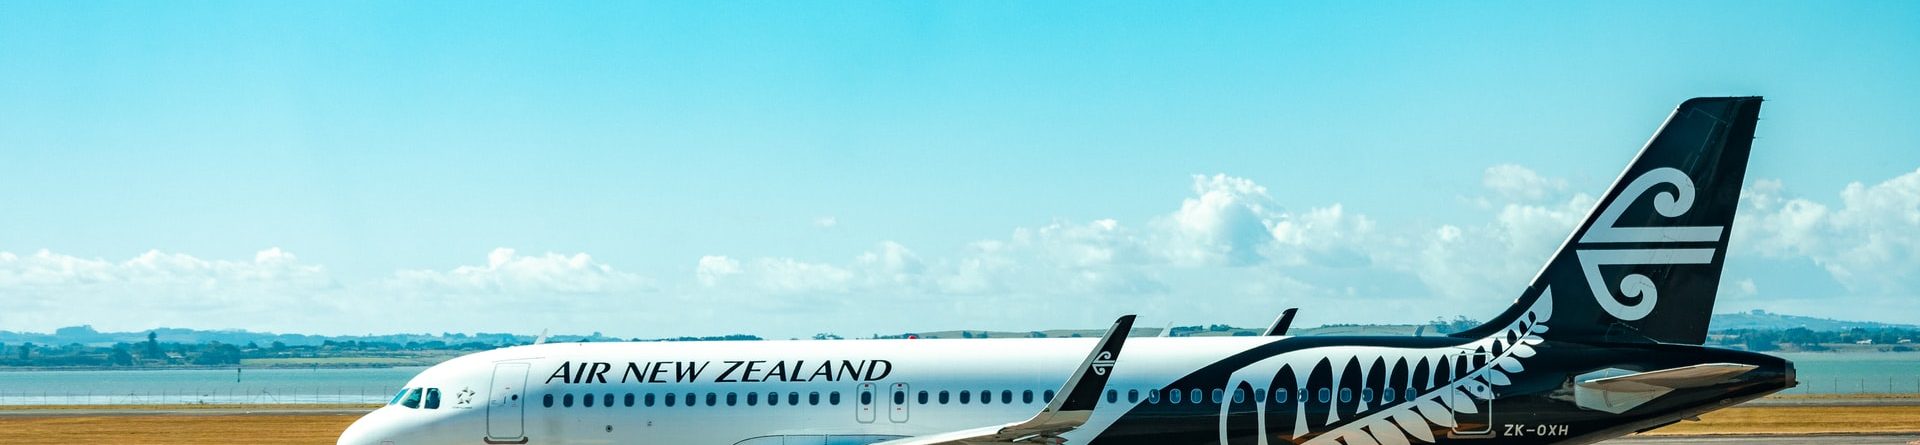 1000 international students will come to New Zealand in 2022